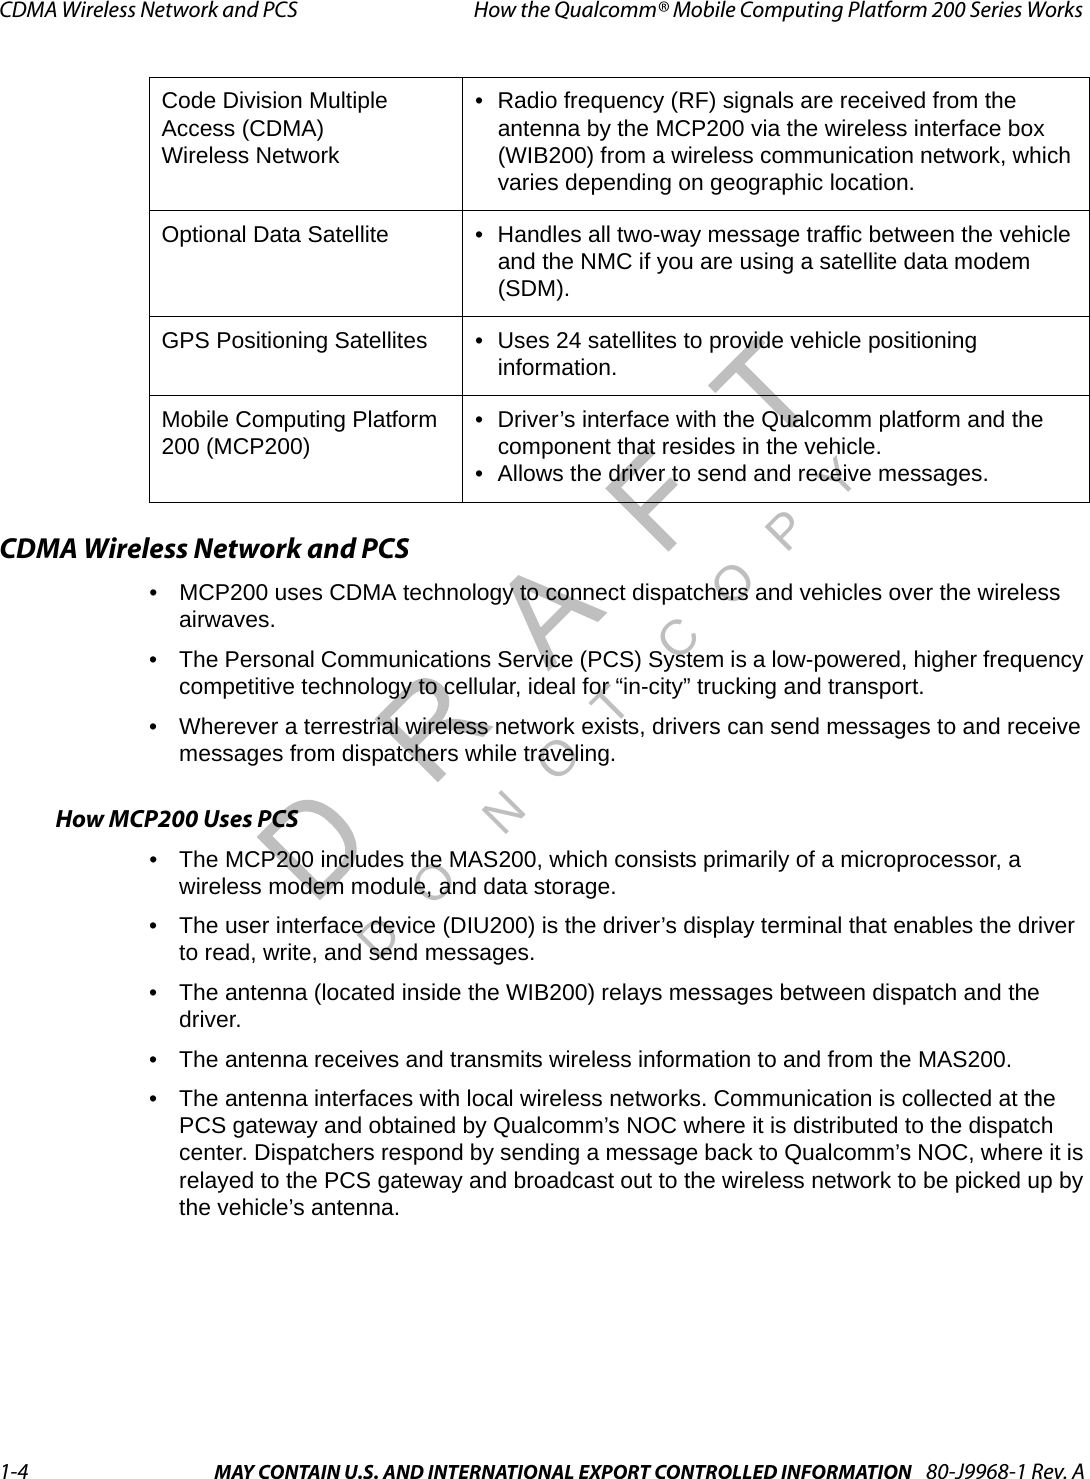 CDMA Wireless Network and PCS How the Qualcomm® Mobile Computing Platform 200 Series Works1-4 MAY CONTAIN U.S. AND INTERNATIONAL EXPORT CONTROLLED INFORMATION 80-J9968-1 Rev. ADO NOT COPYCDMA Wireless Network and PCS• MCP200 uses CDMA technology to connect dispatchers and vehicles over the wireless airwaves.• The Personal Communications Service (PCS) System is a low-powered, higher frequency competitive technology to cellular, ideal for “in-city” trucking and transport. • Wherever a terrestrial wireless network exists, drivers can send messages to and receive messages from dispatchers while traveling. How MCP200 Uses PCS• The MCP200 includes the MAS200, which consists primarily of a microprocessor, a wireless modem module, and data storage.• The user interface device (DIU200) is the driver’s display terminal that enables the driver to read, write, and send messages. • The antenna (located inside the WIB200) relays messages between dispatch and the driver. • The antenna receives and transmits wireless information to and from the MAS200. • The antenna interfaces with local wireless networks. Communication is collected at the PCS gateway and obtained by Qualcomm’s NOC where it is distributed to the dispatch center. Dispatchers respond by sending a message back to Qualcomm’s NOC, where it is relayed to the PCS gateway and broadcast out to the wireless network to be picked up by the vehicle’s antenna. Code Division Multiple Access (CDMA)Wireless Network• Radio frequency (RF) signals are received from the antenna by the MCP200 via the wireless interface box (WIB200) from a wireless communication network, which varies depending on geographic location.Optional Data Satellite • Handles all two-way message traffic between the vehicle and the NMC if you are using a satellite data modem (SDM). GPS Positioning Satellites • Uses 24 satellites to provide vehicle positioning information.Mobile Computing Platform 200 (MCP200) • Driver’s interface with the Qualcomm platform and the component that resides in the vehicle.• Allows the driver to send and receive messages.